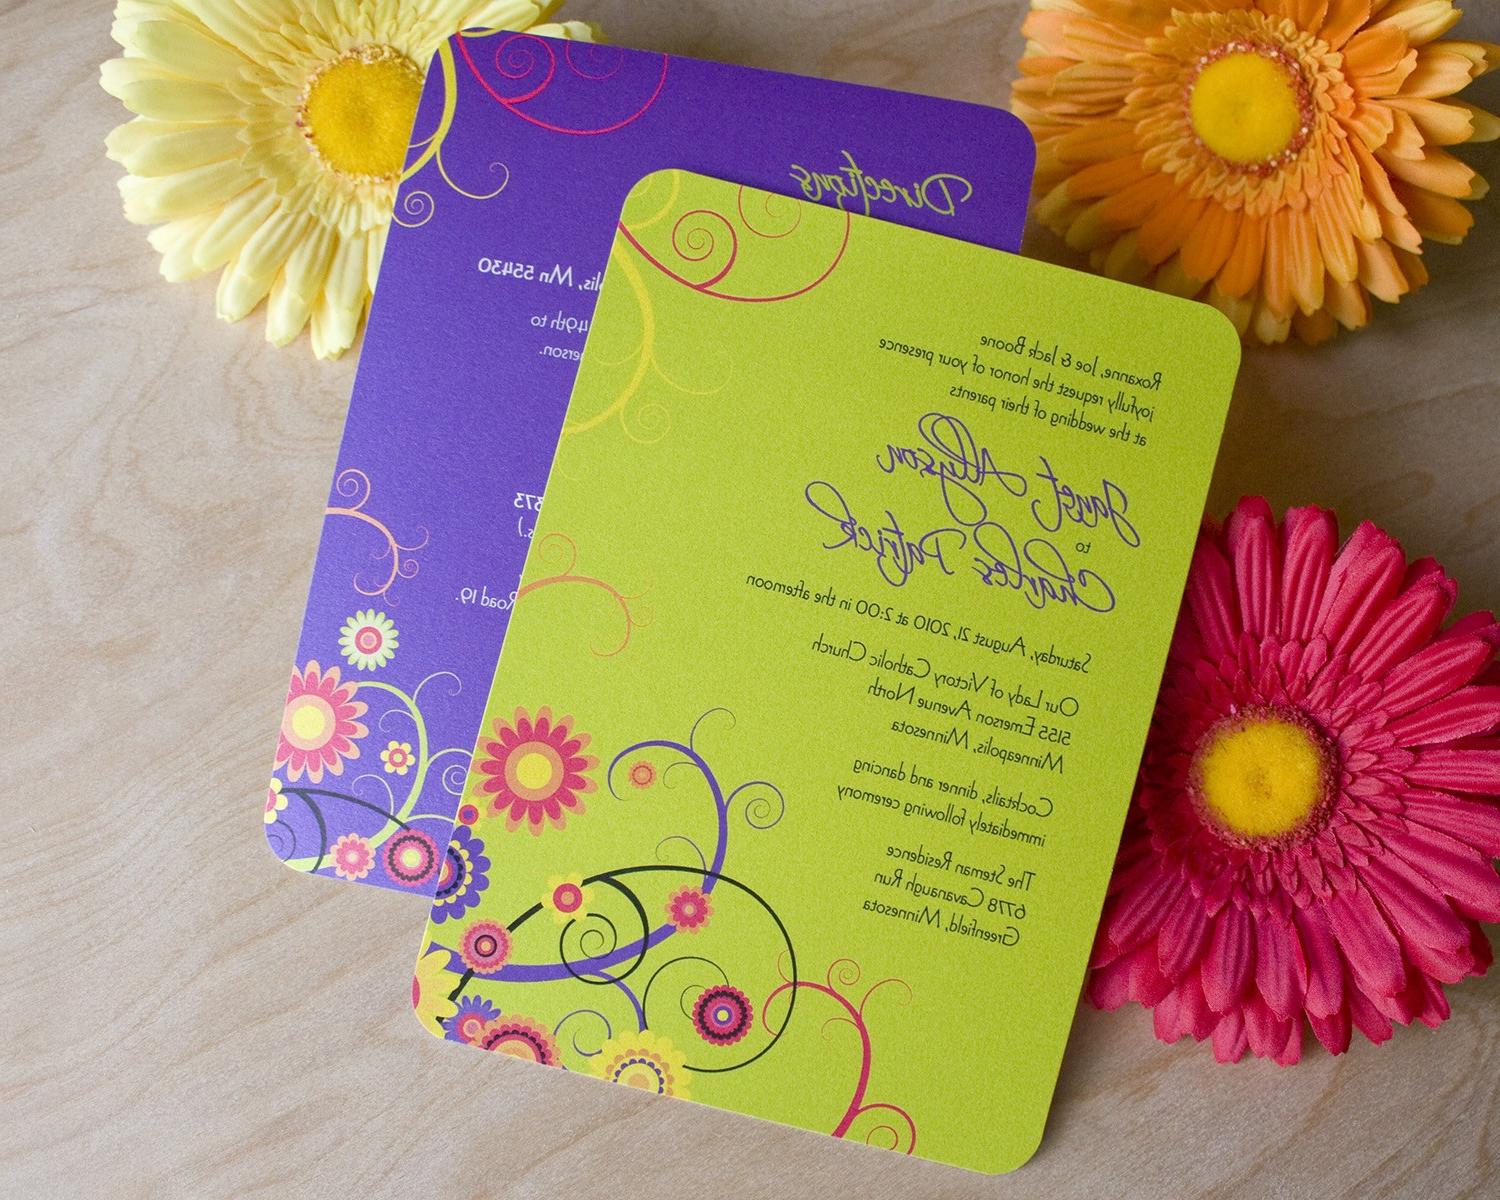 Rounded corners for wedding